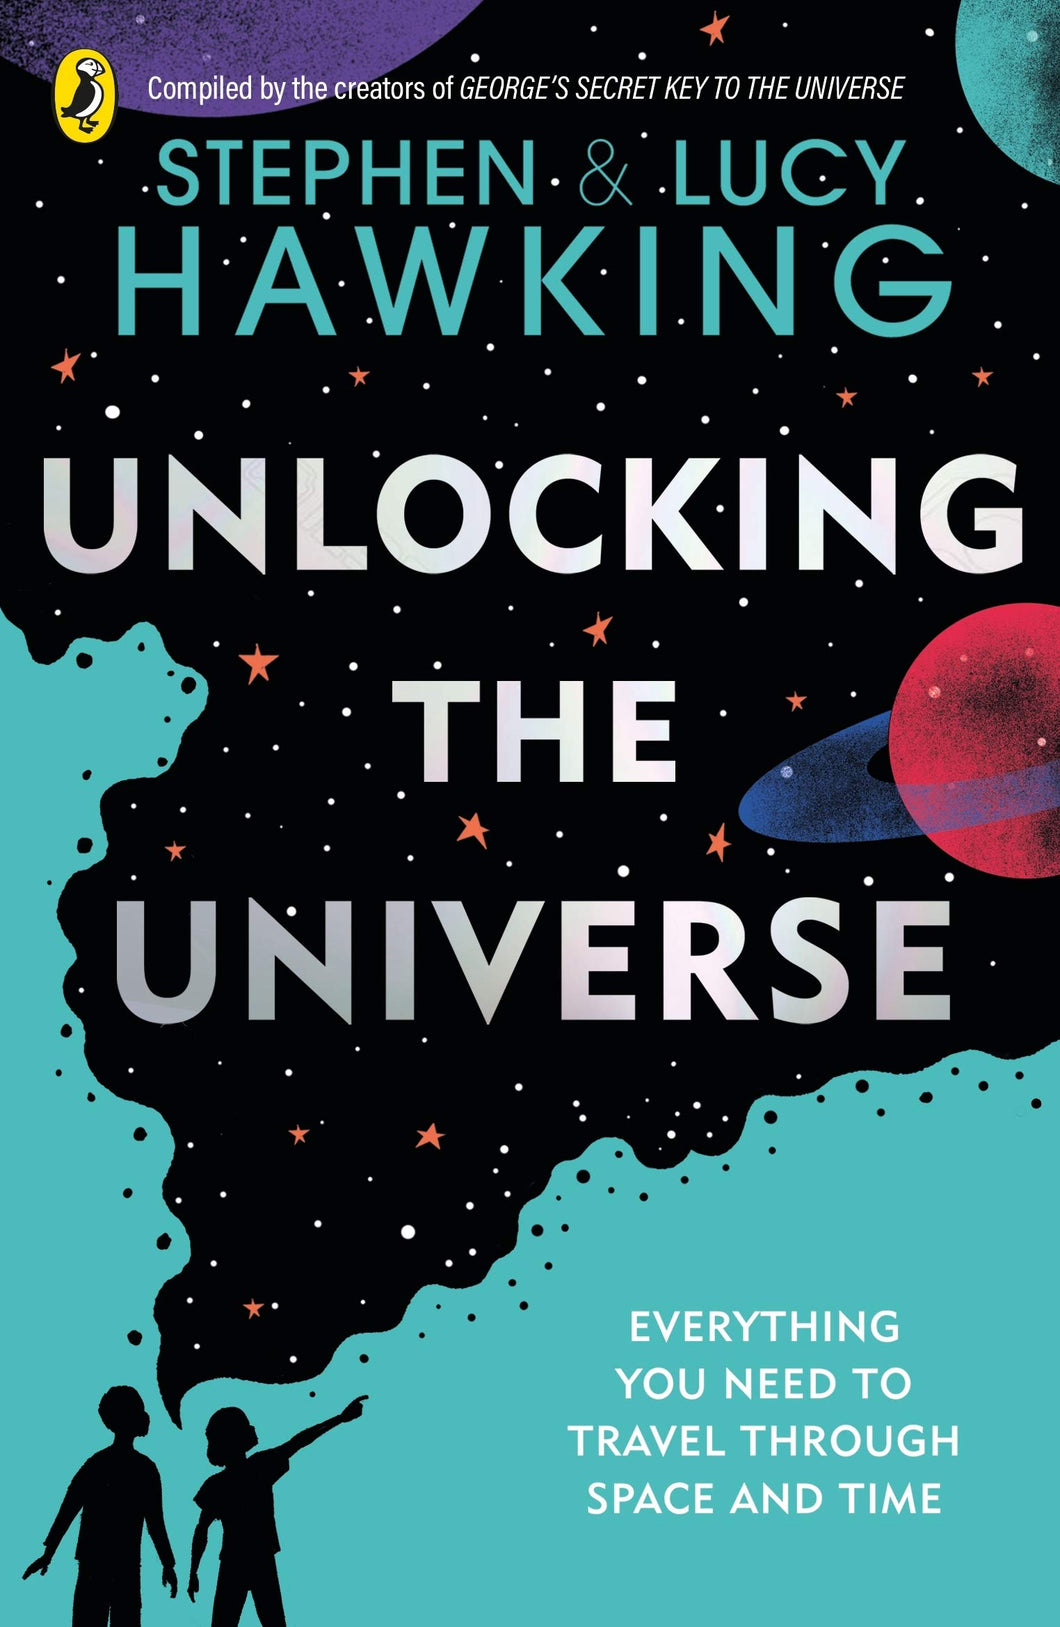 Unlocking the Universe book cover is light blue and black. It shows shadows of a boy and girl pointing into the night sky. Underneath the title 